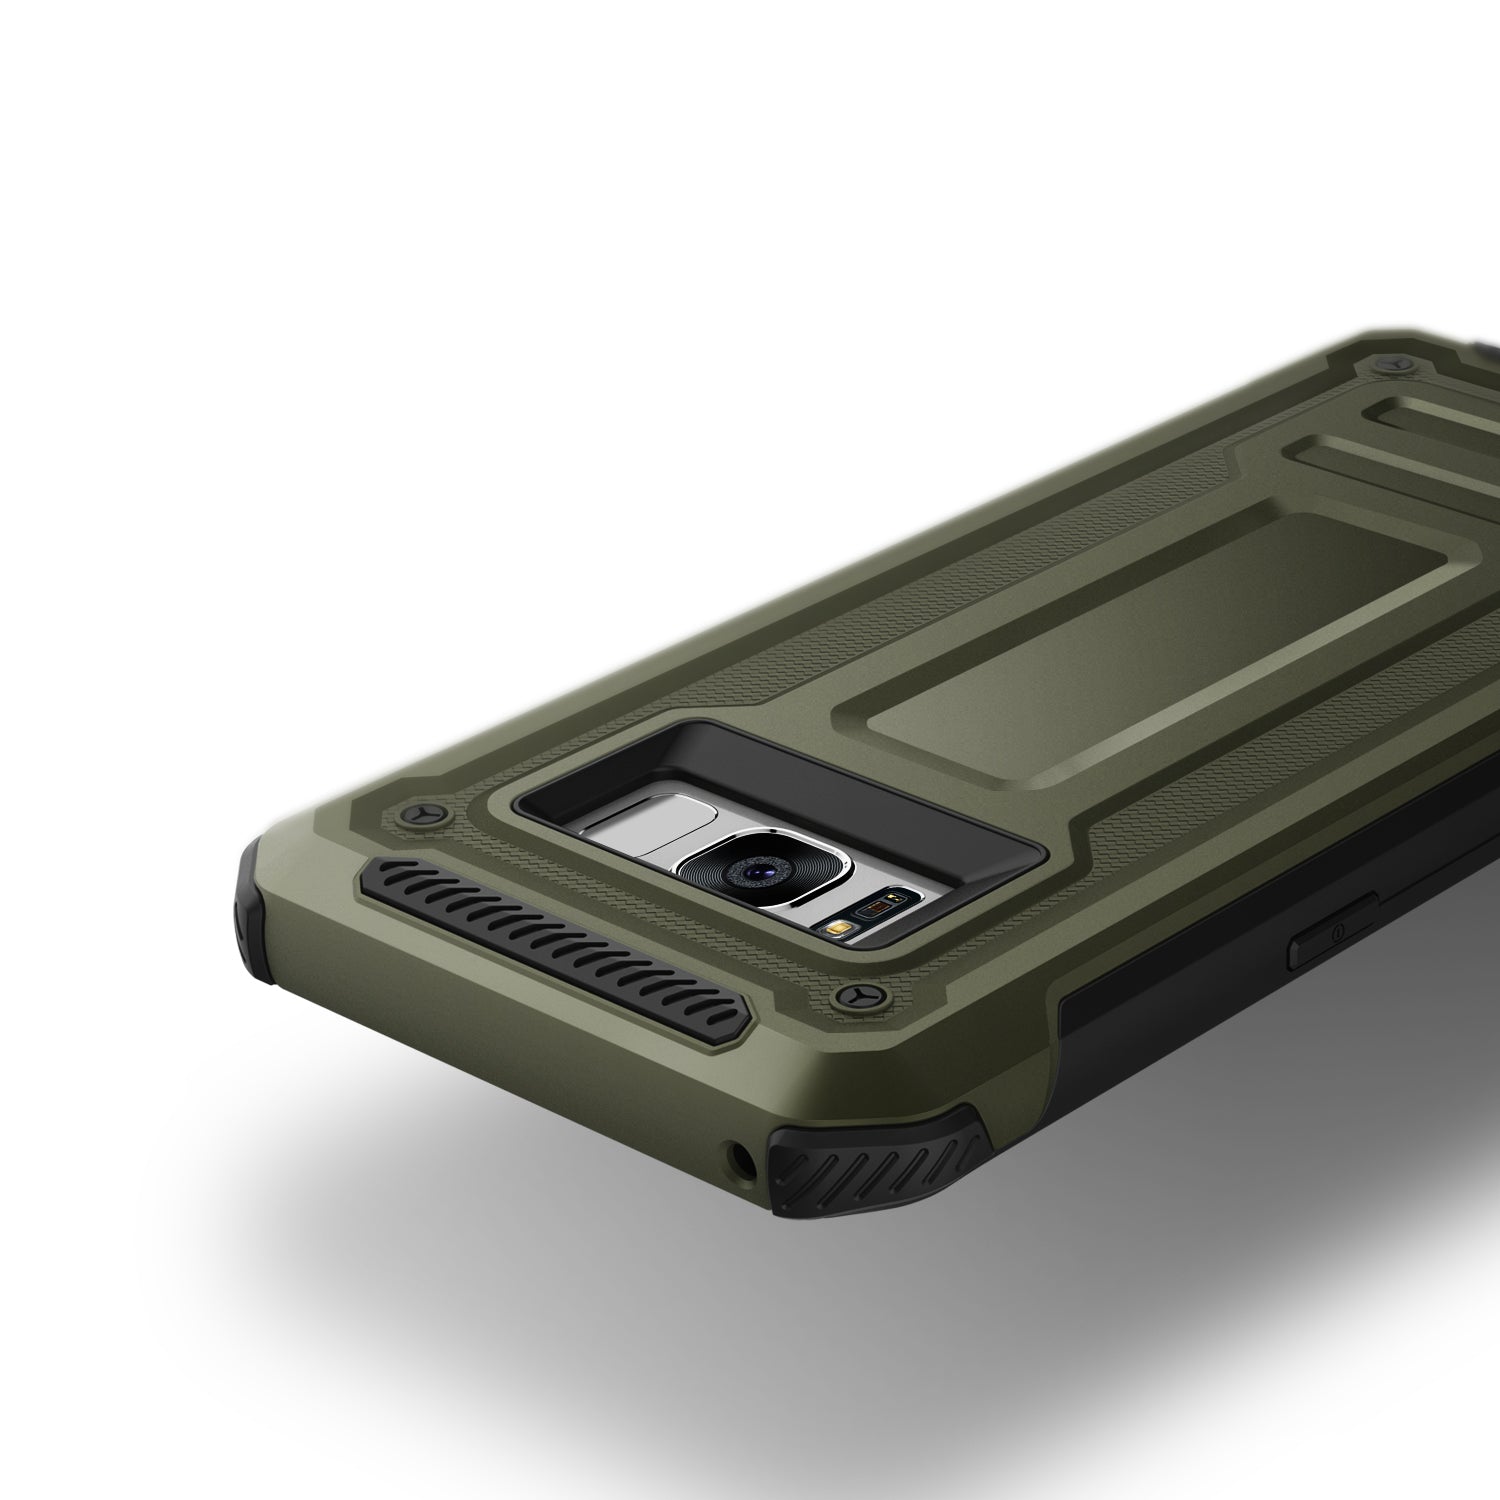 Terra Guard Series For Galaxy S8 Anti Shocks Tough Rugged Case Original From VRS Military Green